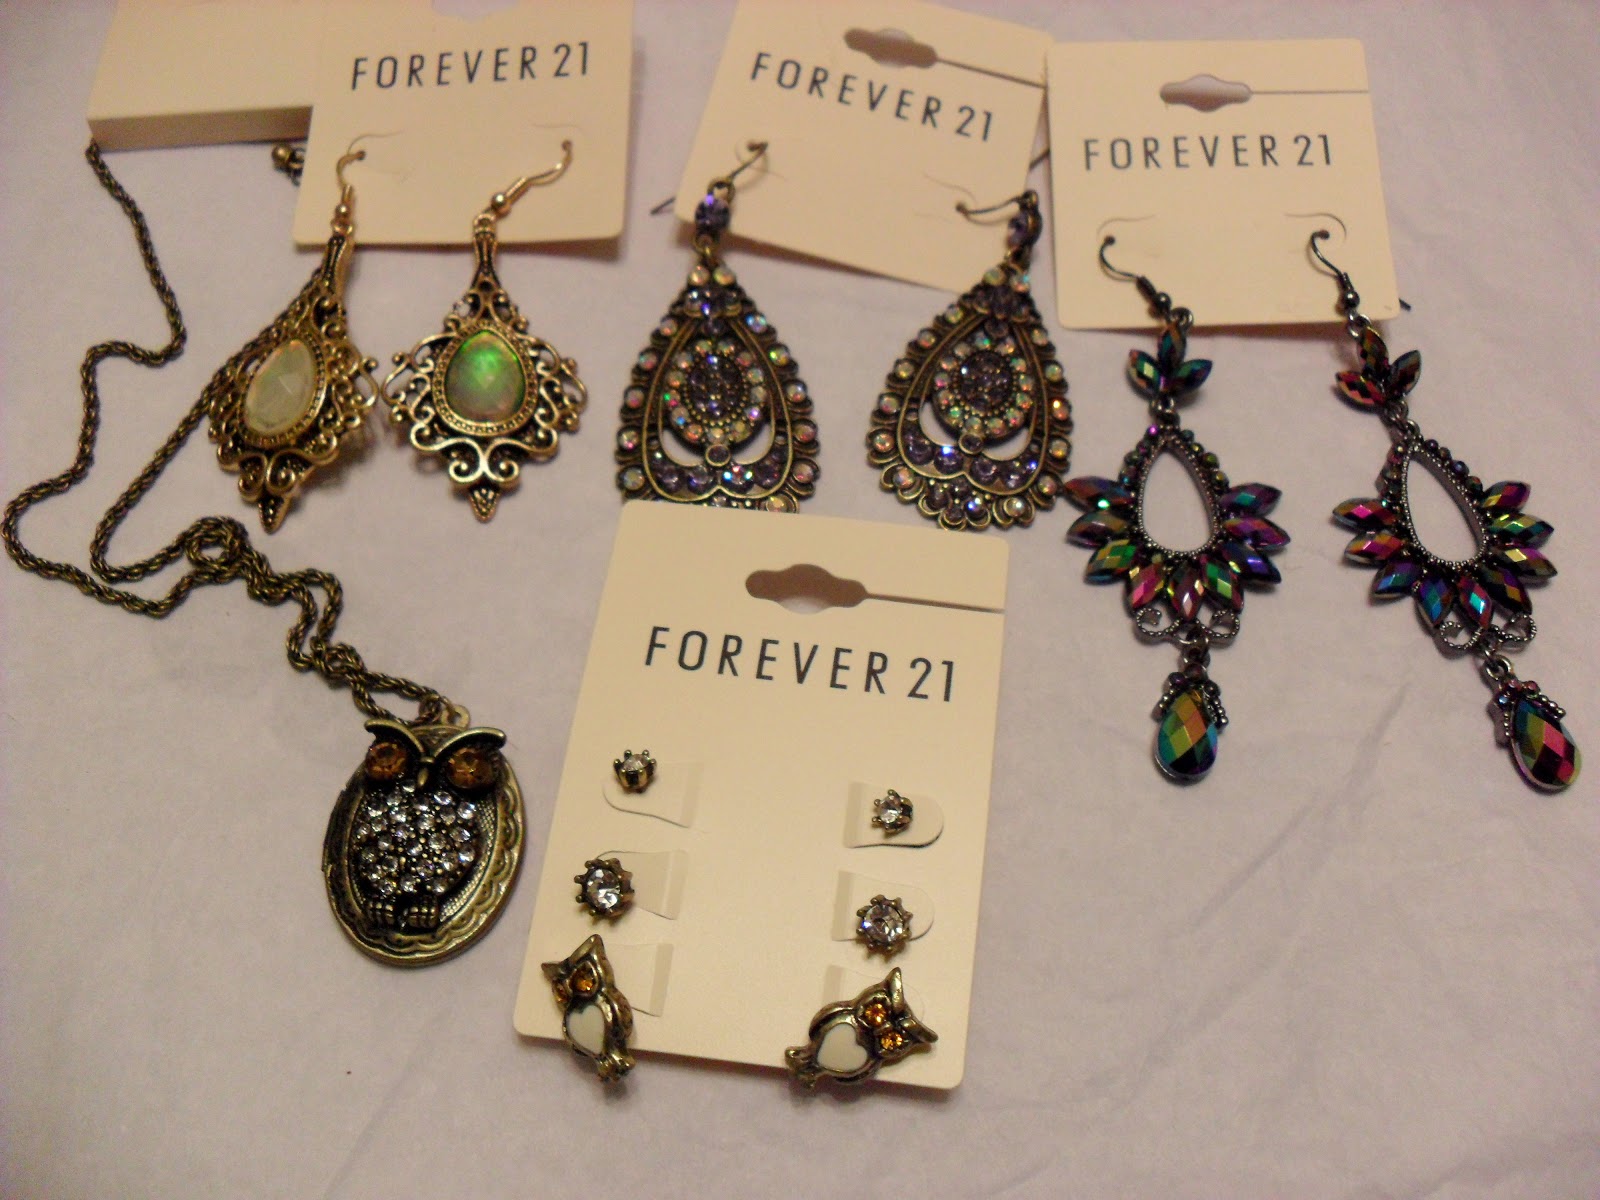 Forever21 Jewelry Haul